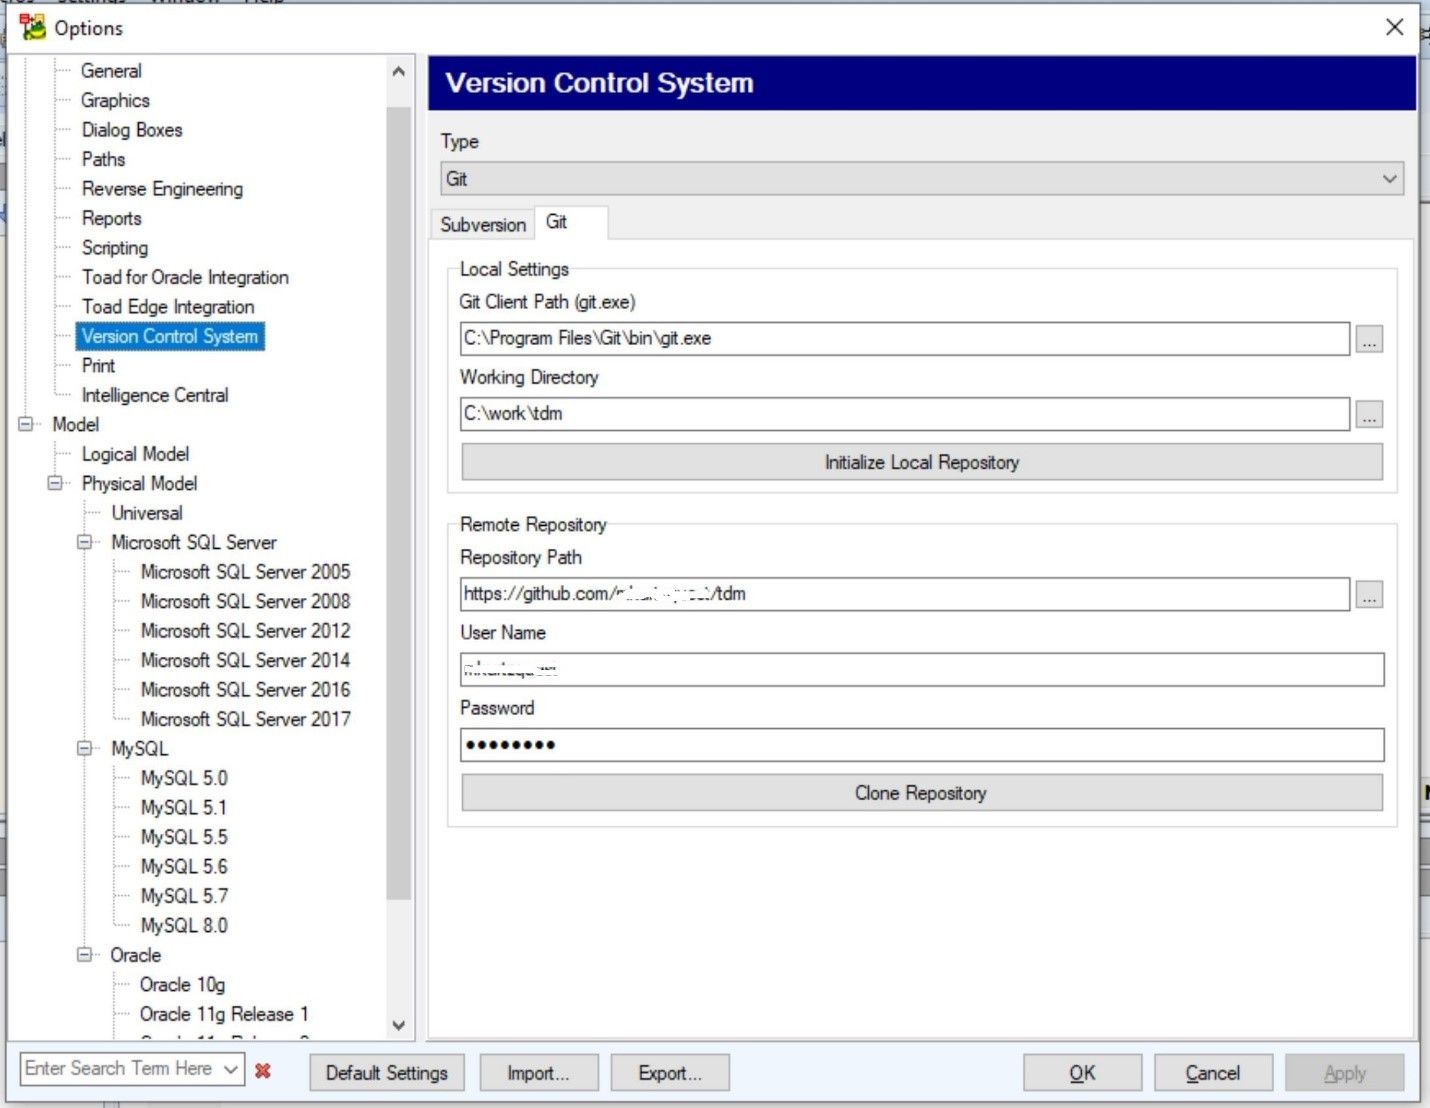 Screen shot of The Toad Data Modeler options page, where you configure your VCS options.)